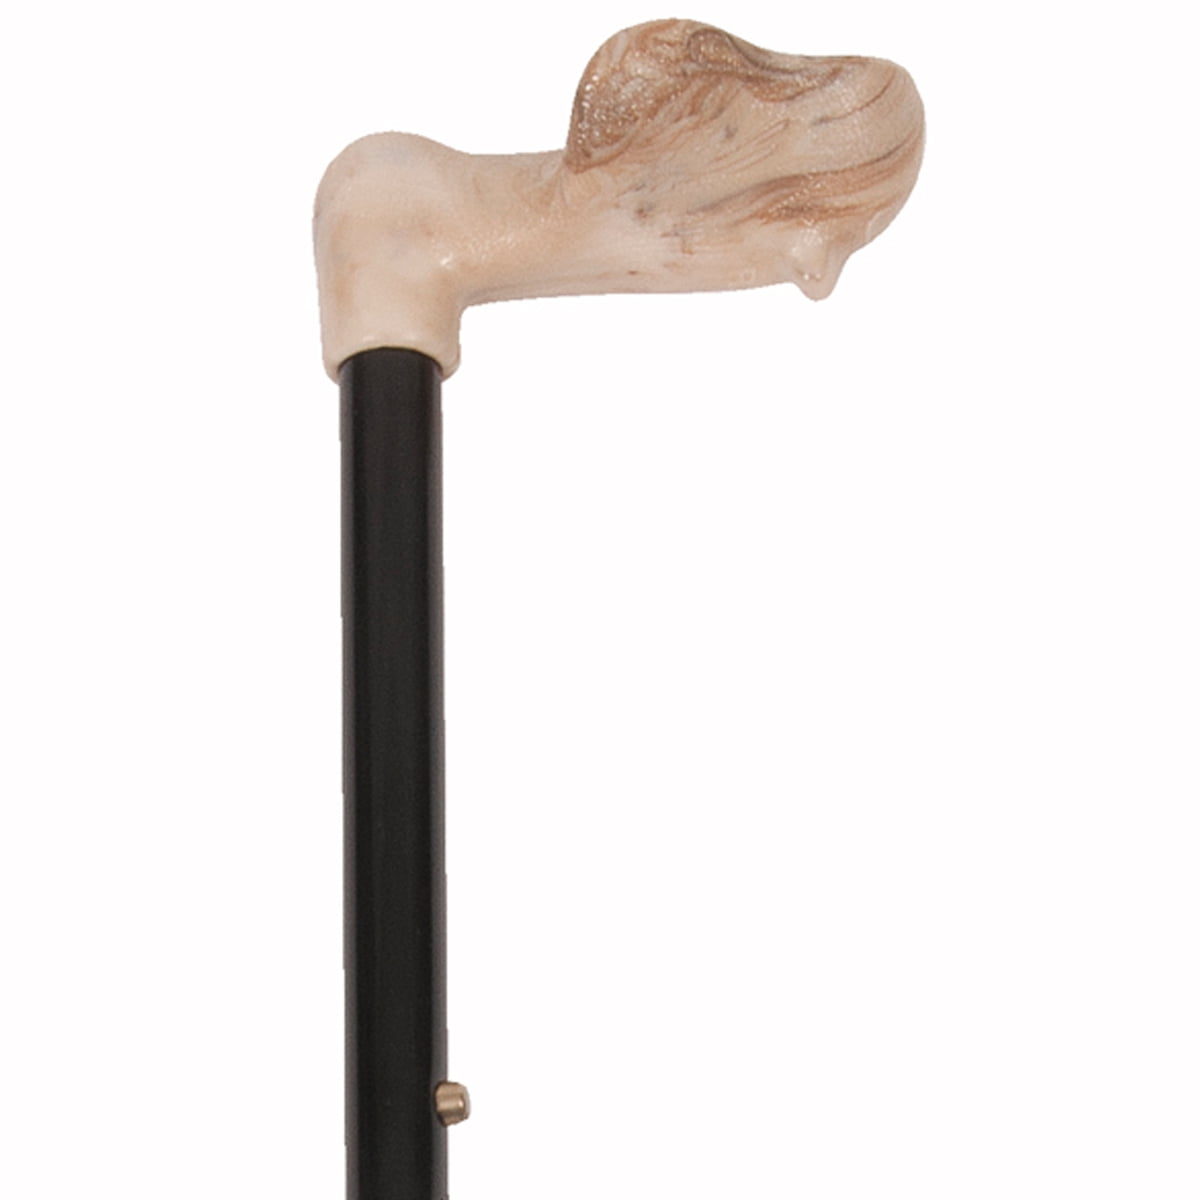  PCP Wood Cane, Derby Handle Grip, Solid Wood Finish